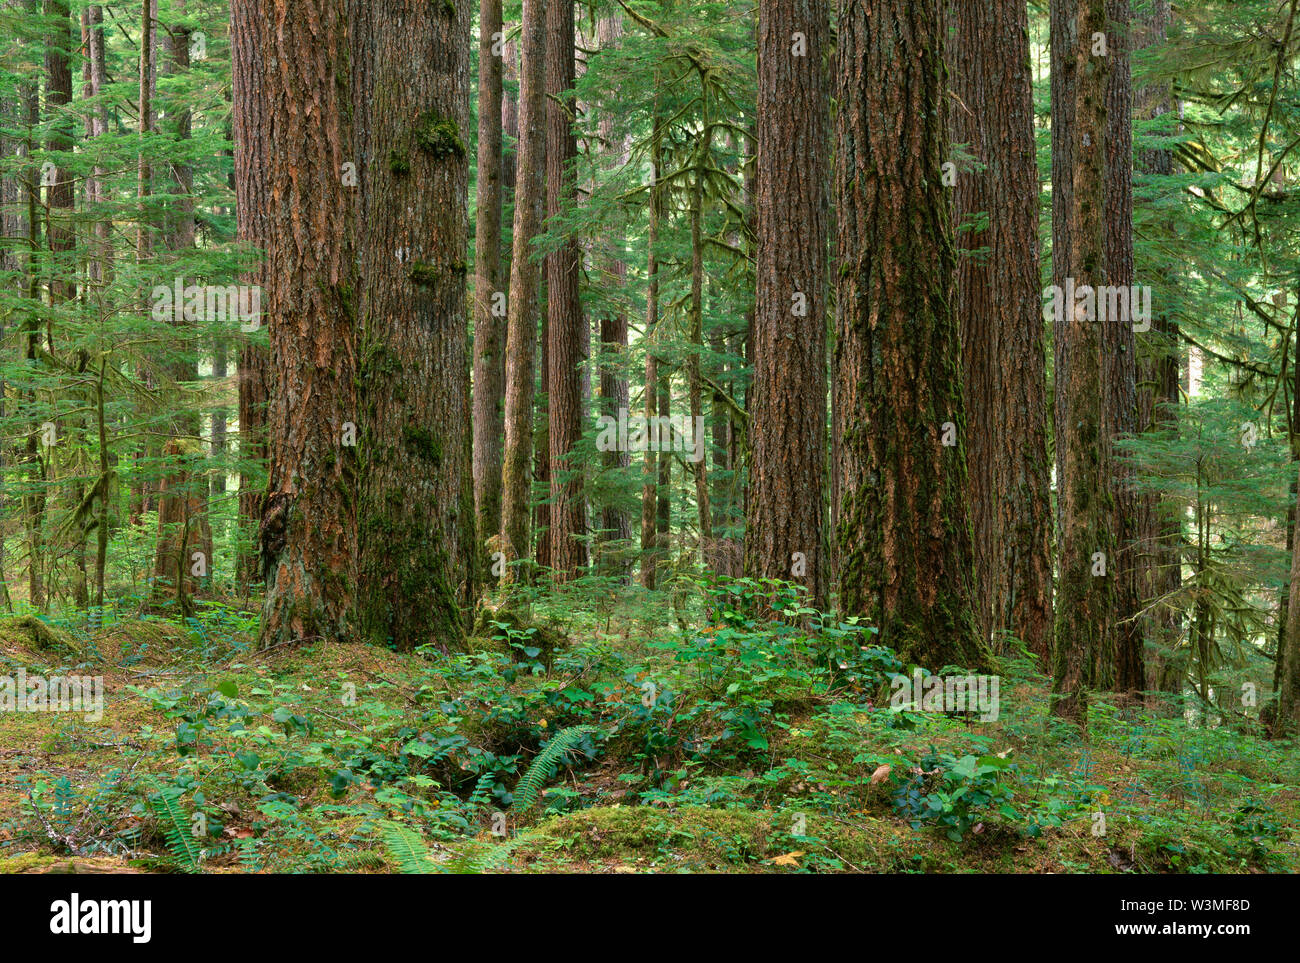 USA, Washington, Mt. Rainier National Park, Trunks of Douglas fir and western hemlock in old growth coniferous forest; Ohanepecosh Valley. Stock Photo